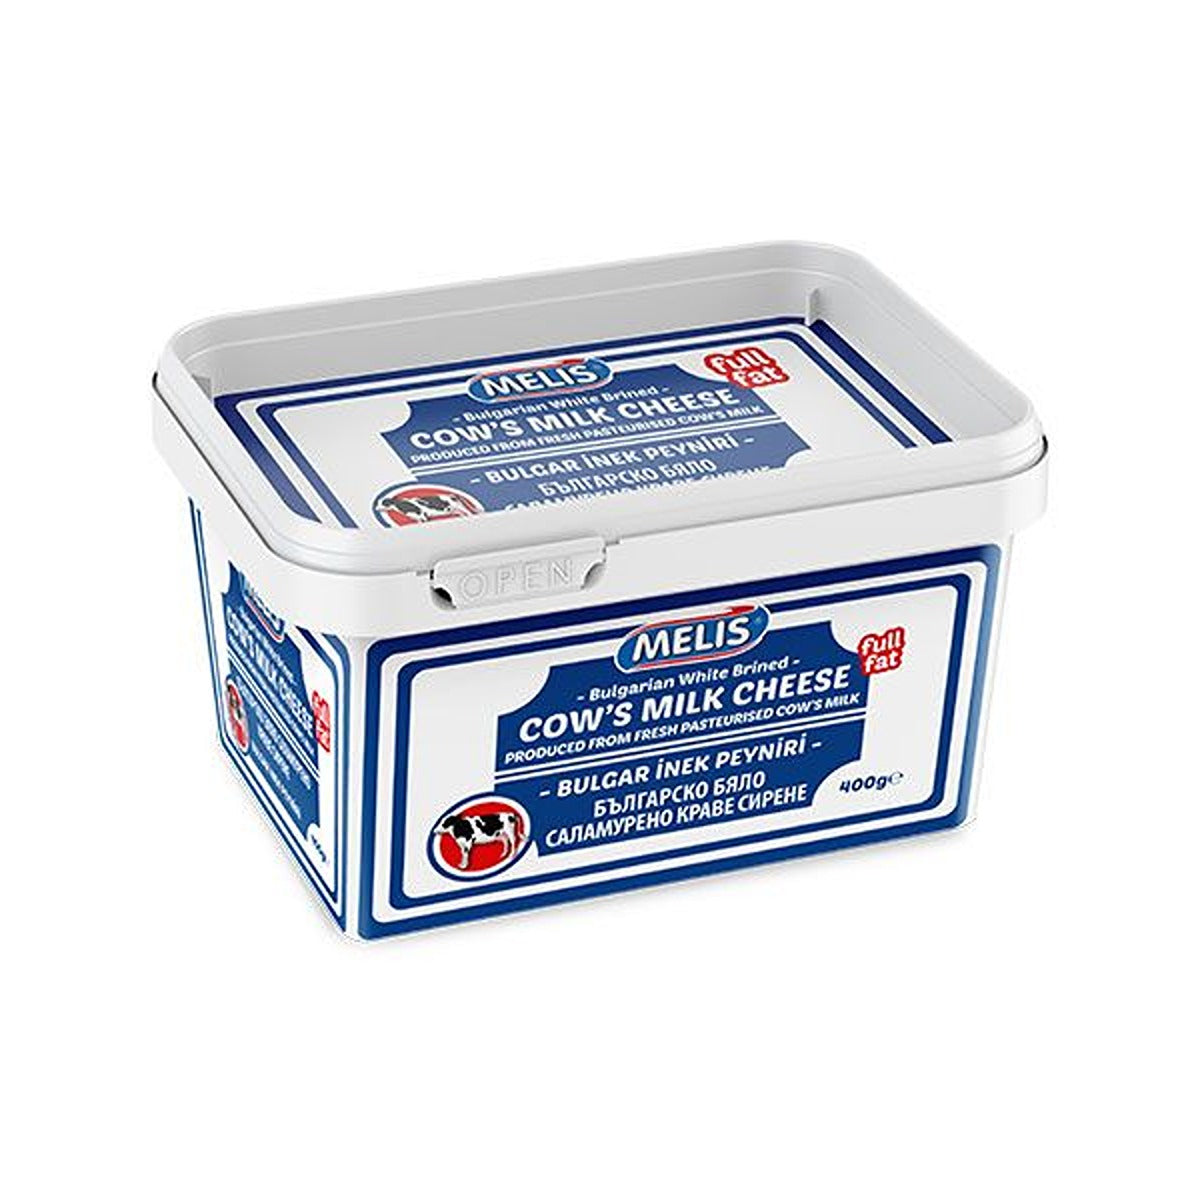 A container of Melis - Bulgarian Cow Cheese - 400g on a white background.